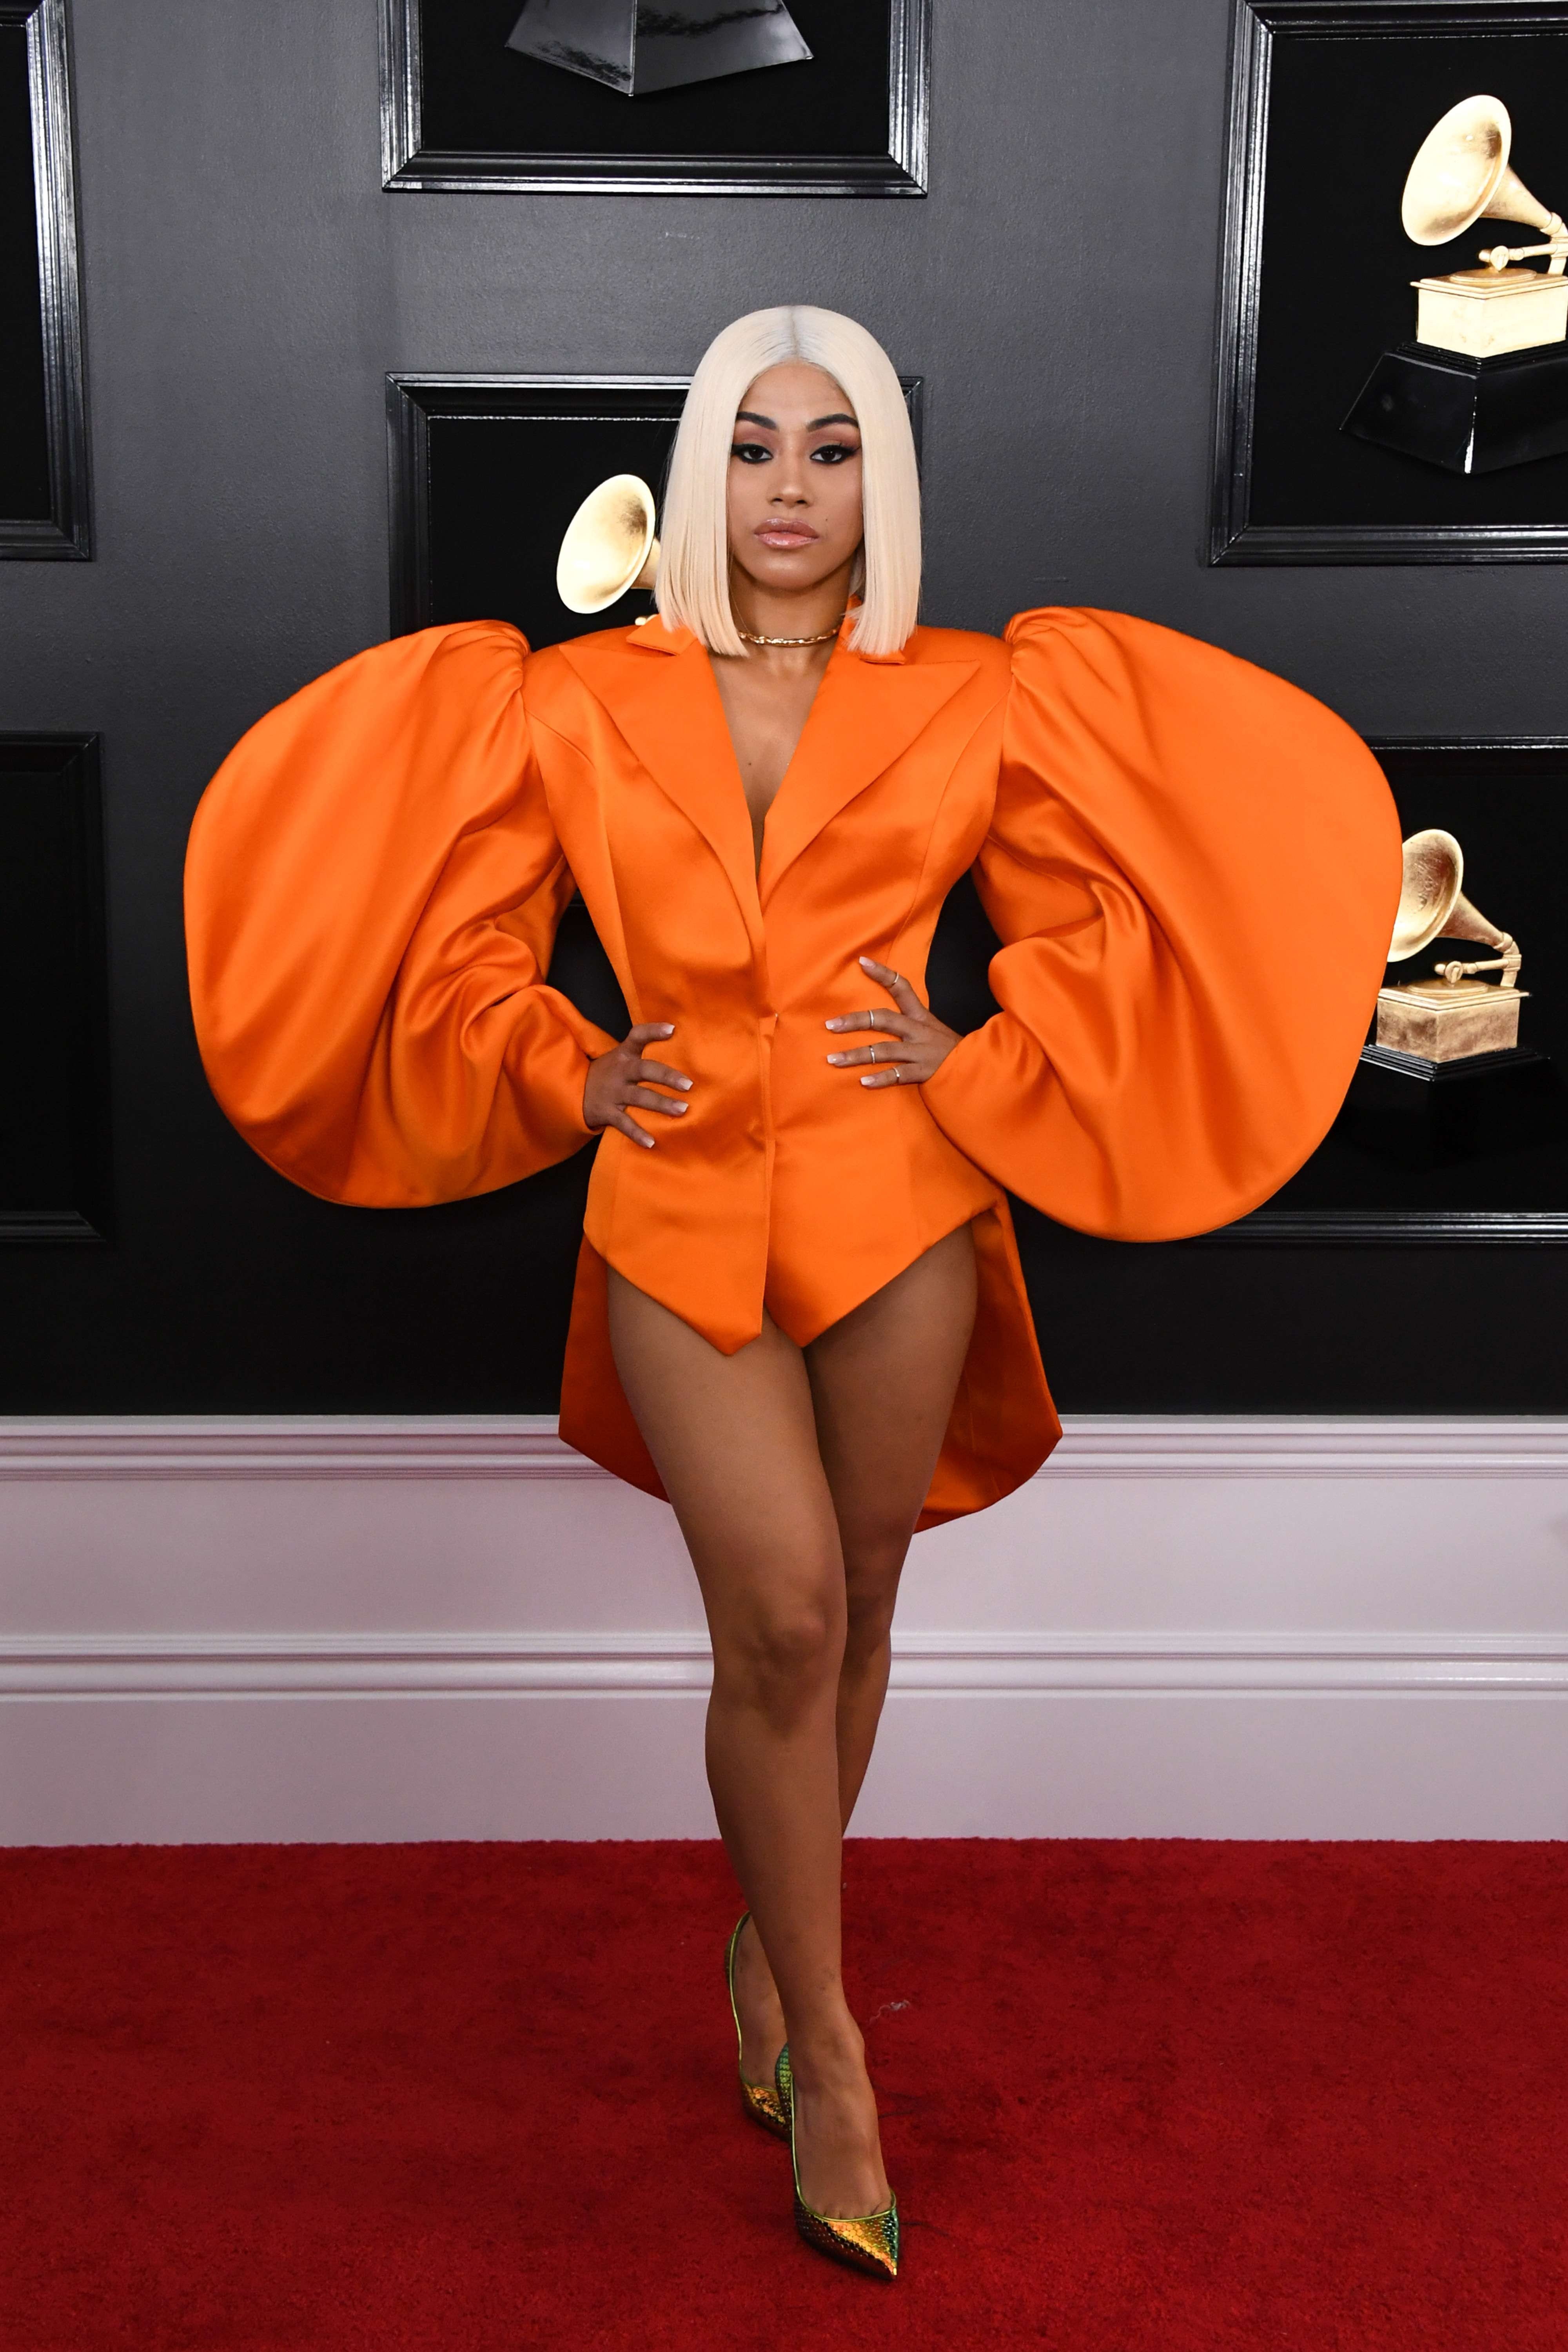 Awards For The Worst Dressed At Grammy's Awards 2019 World inside pictures